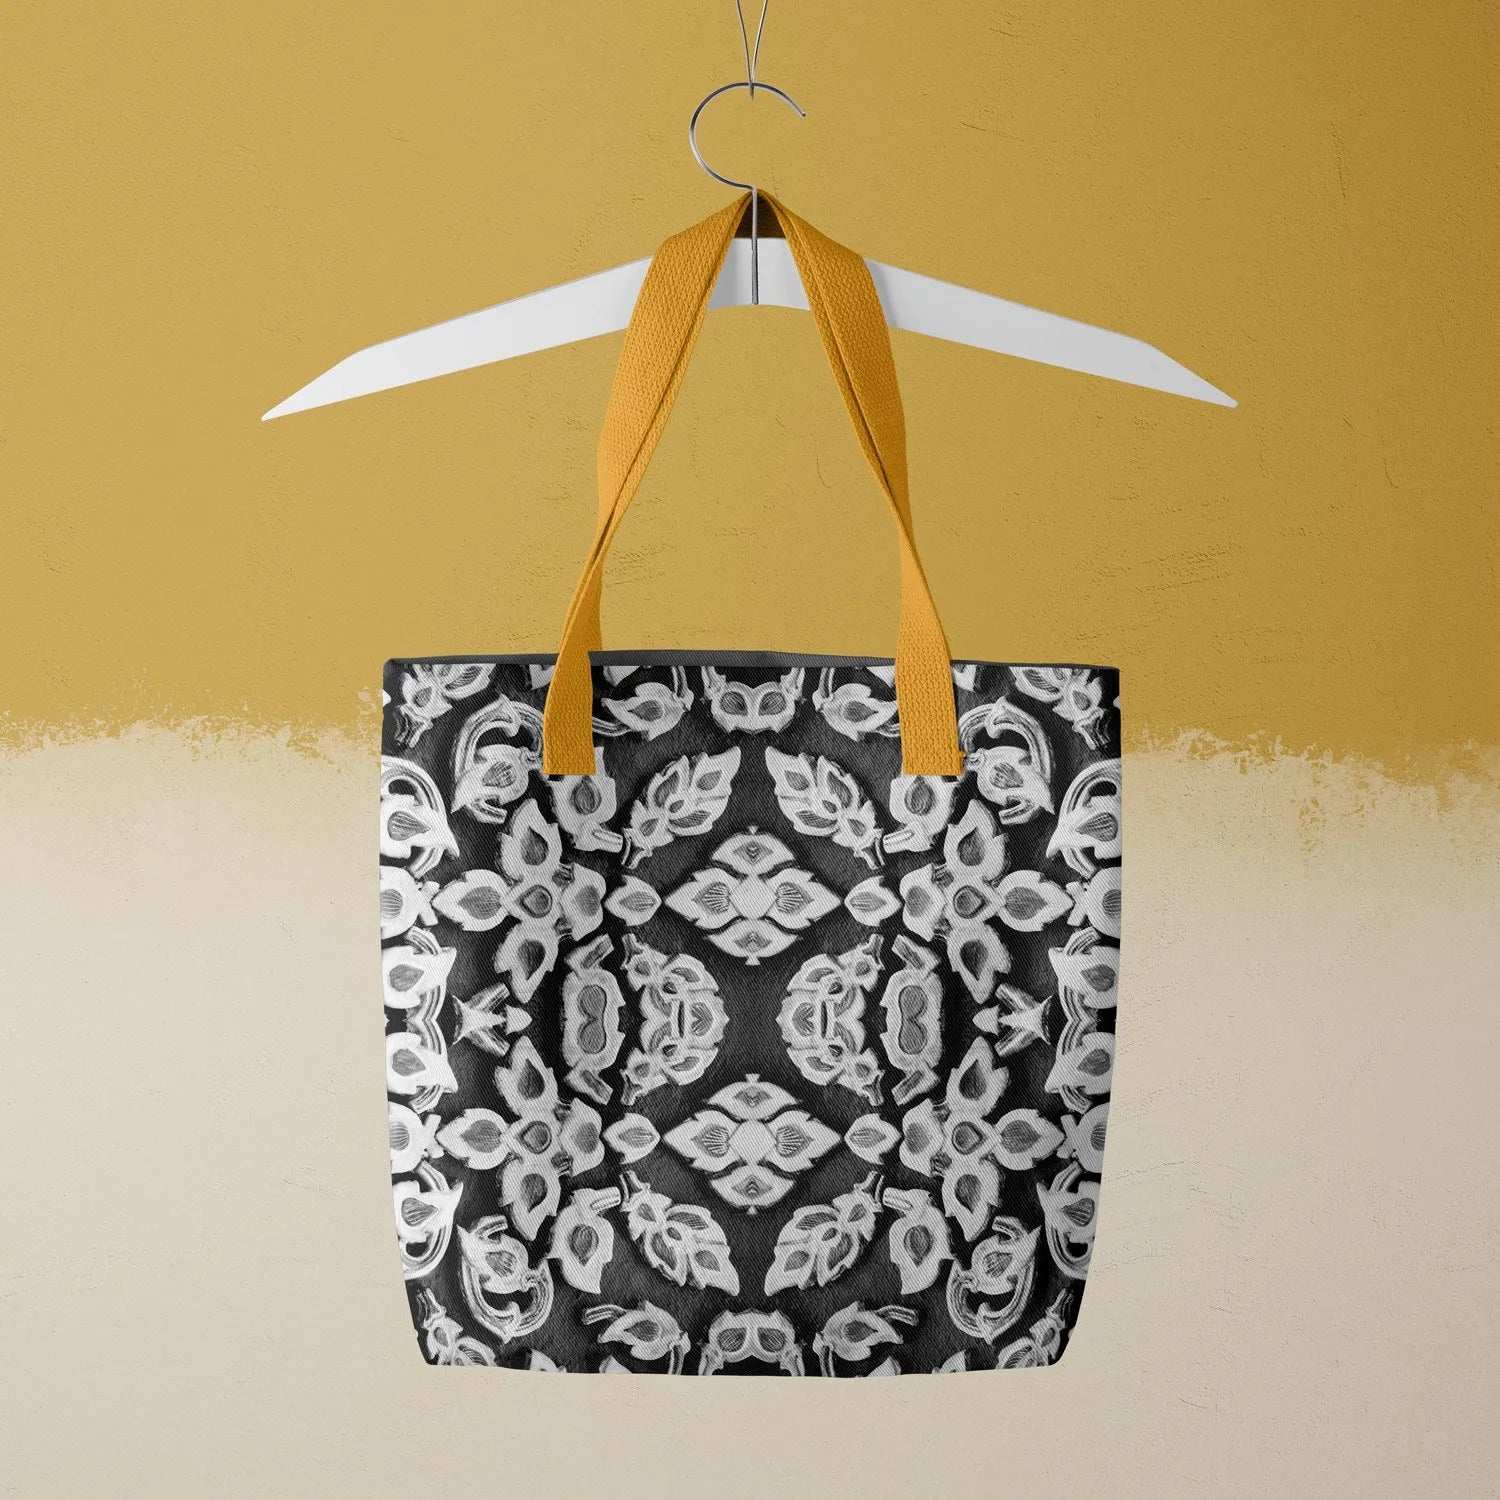 Entering Ayodhya Tote - Black And White - Heavy Duty Reusable Grocery Bag - Yellow Handles - Shopping Totes - Aesthetic